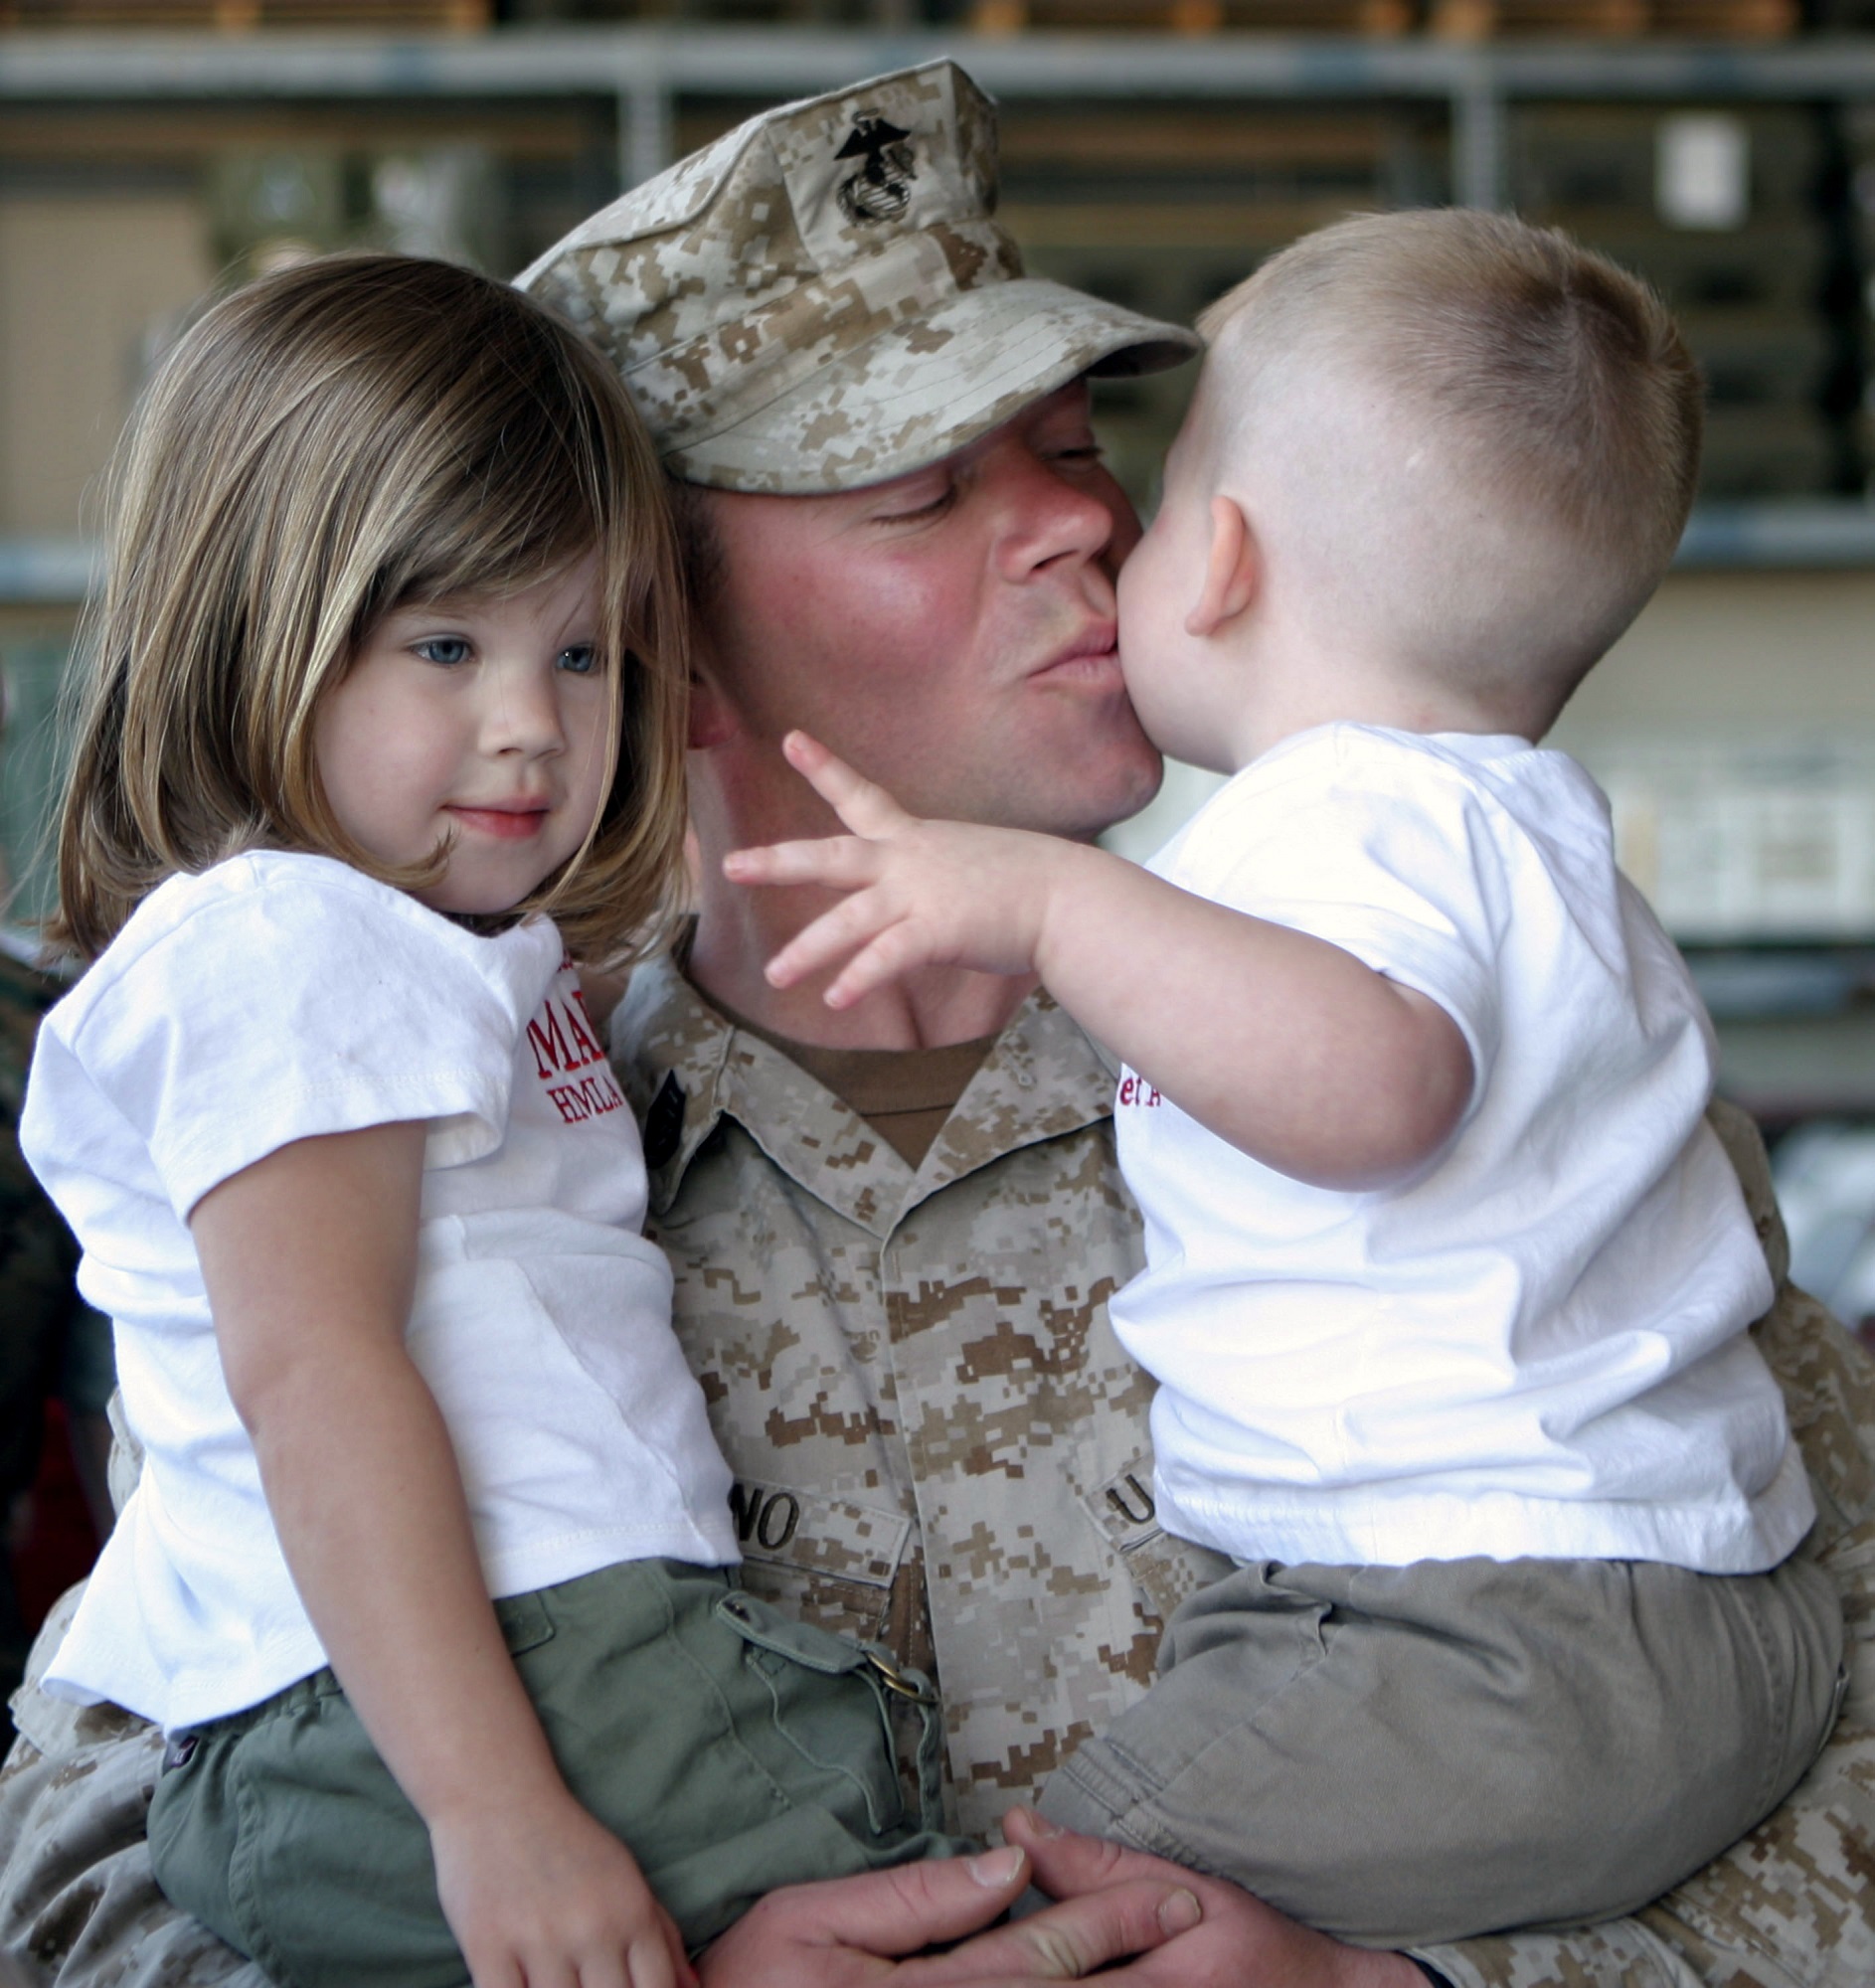 Man dressed in army camouflage holding two young children, and kissing one child on the cheek.